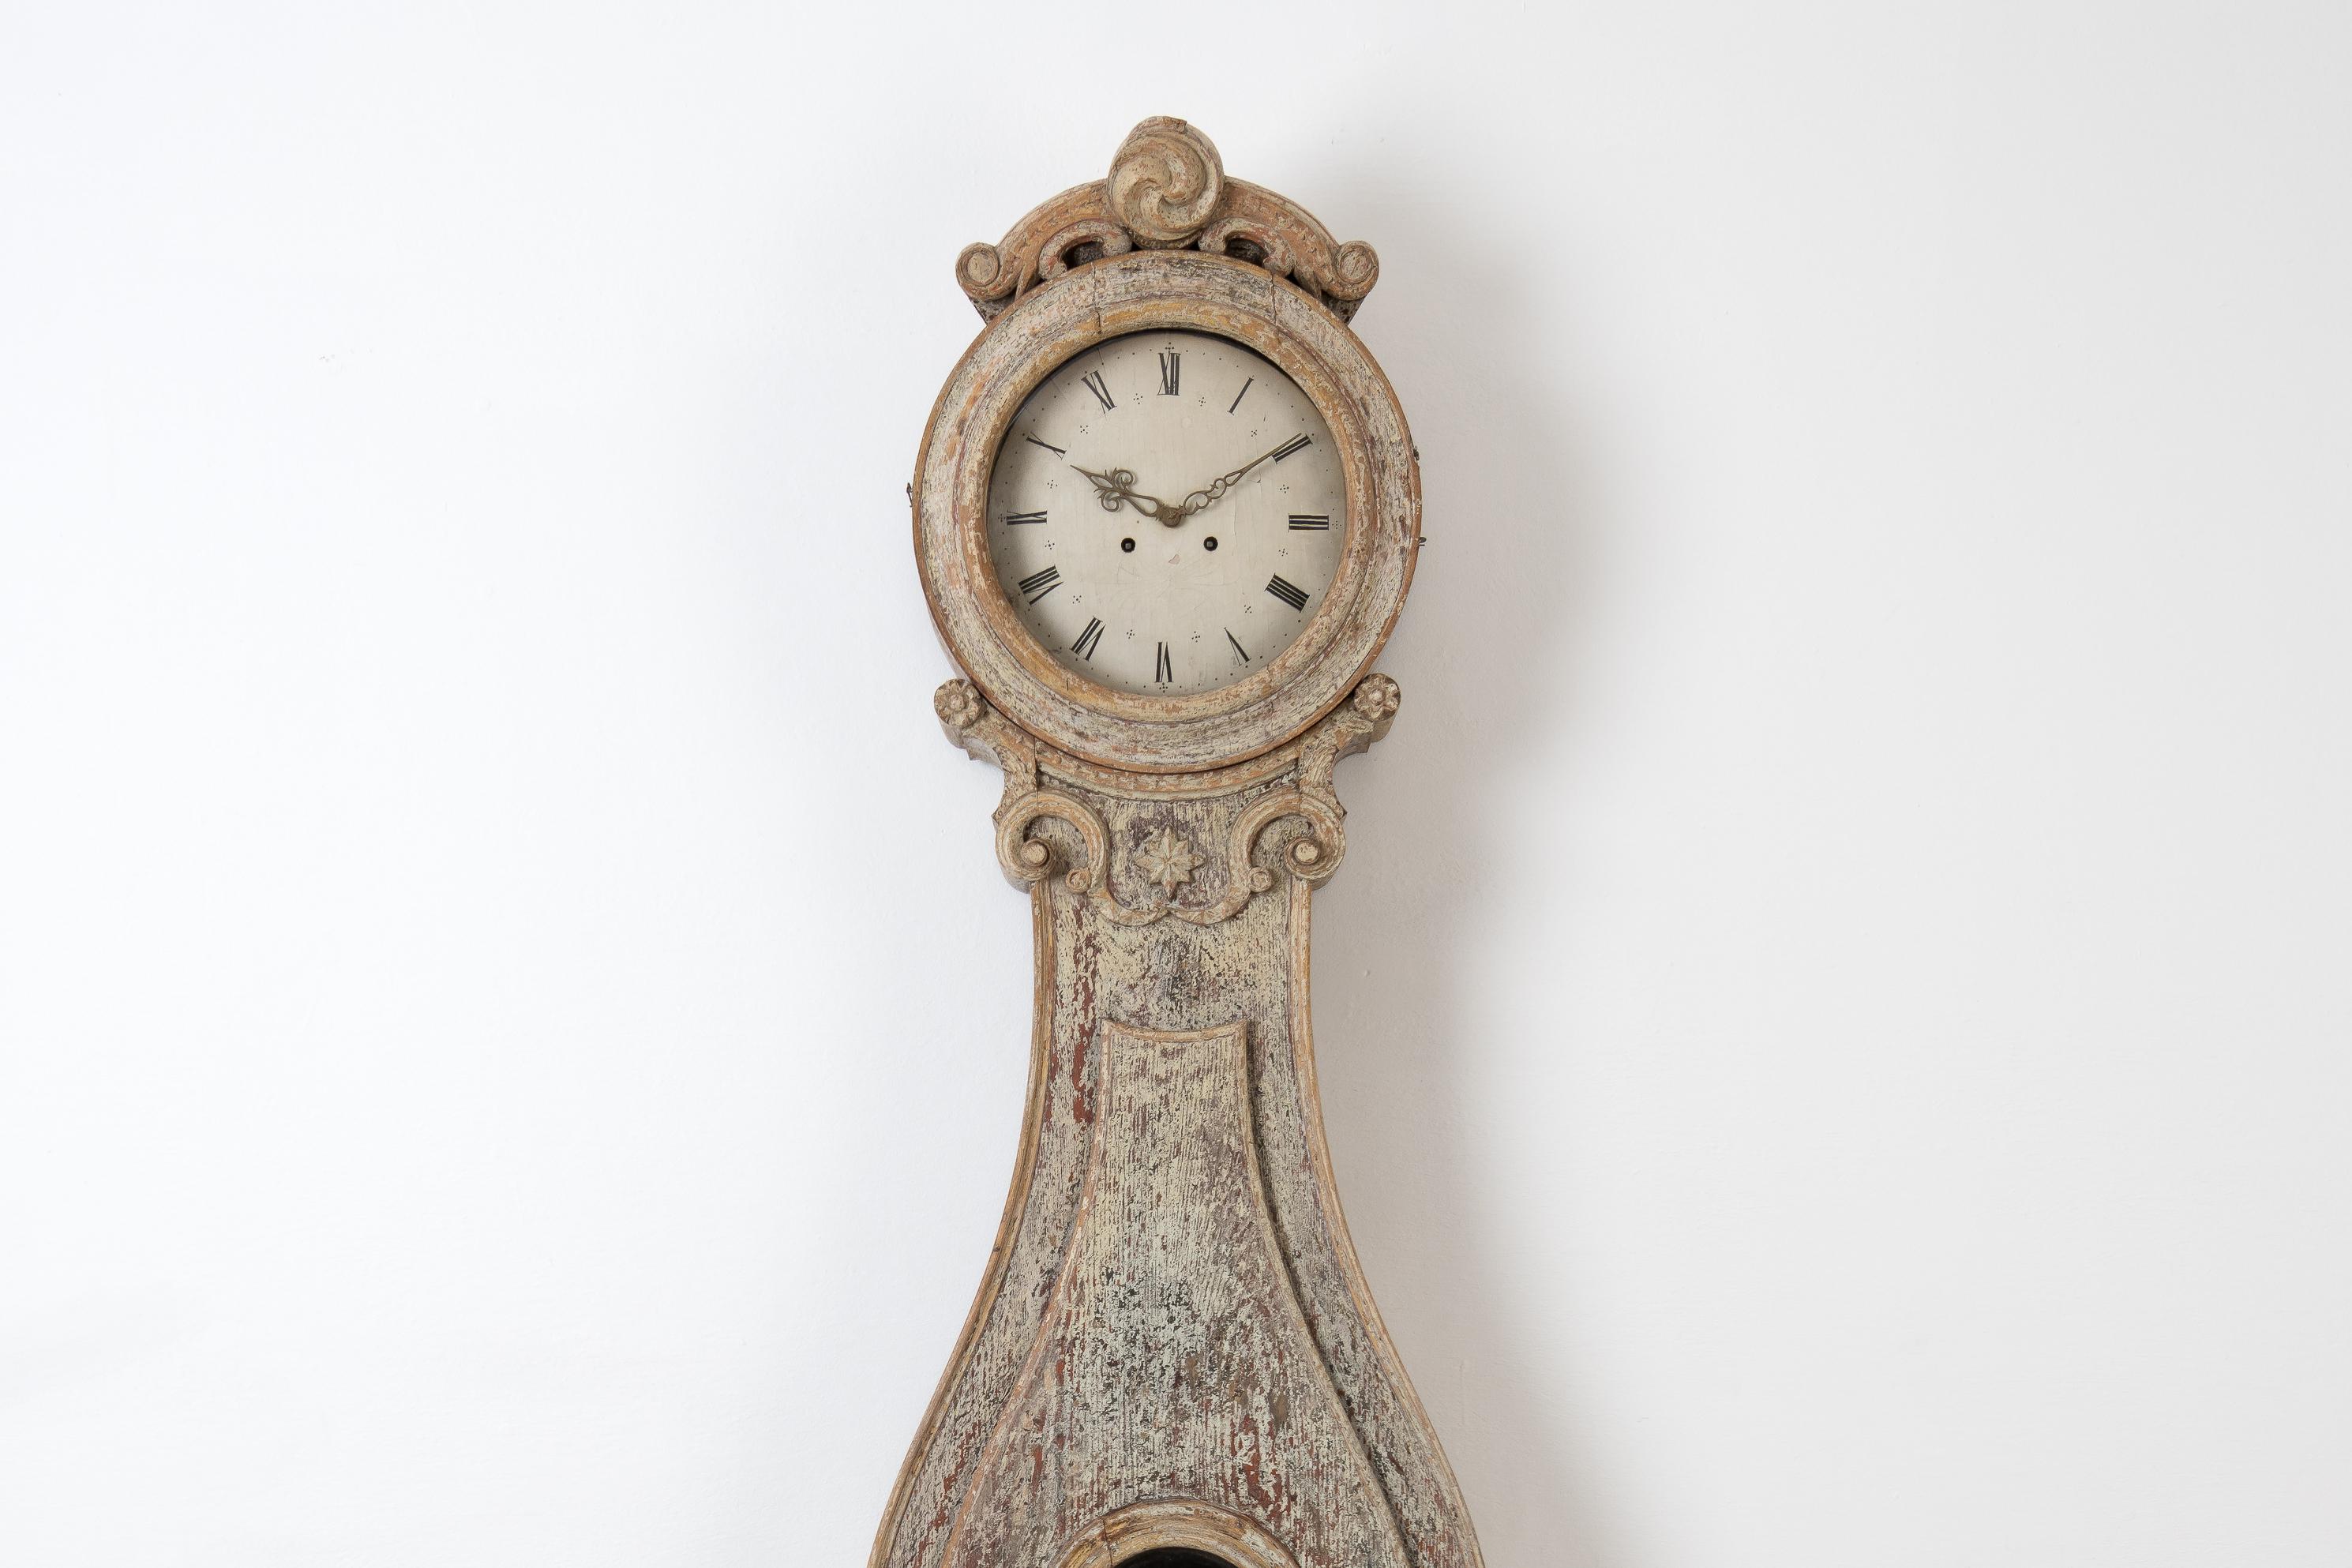 Swedish Rococo long case clock from the village Fryksdalen in Värmland which is where it got its name 'Fryksdals clock'. The clock is in the Rococo style with a case in pine and is dry scraped to the original layer of paint. Made in Sweden between